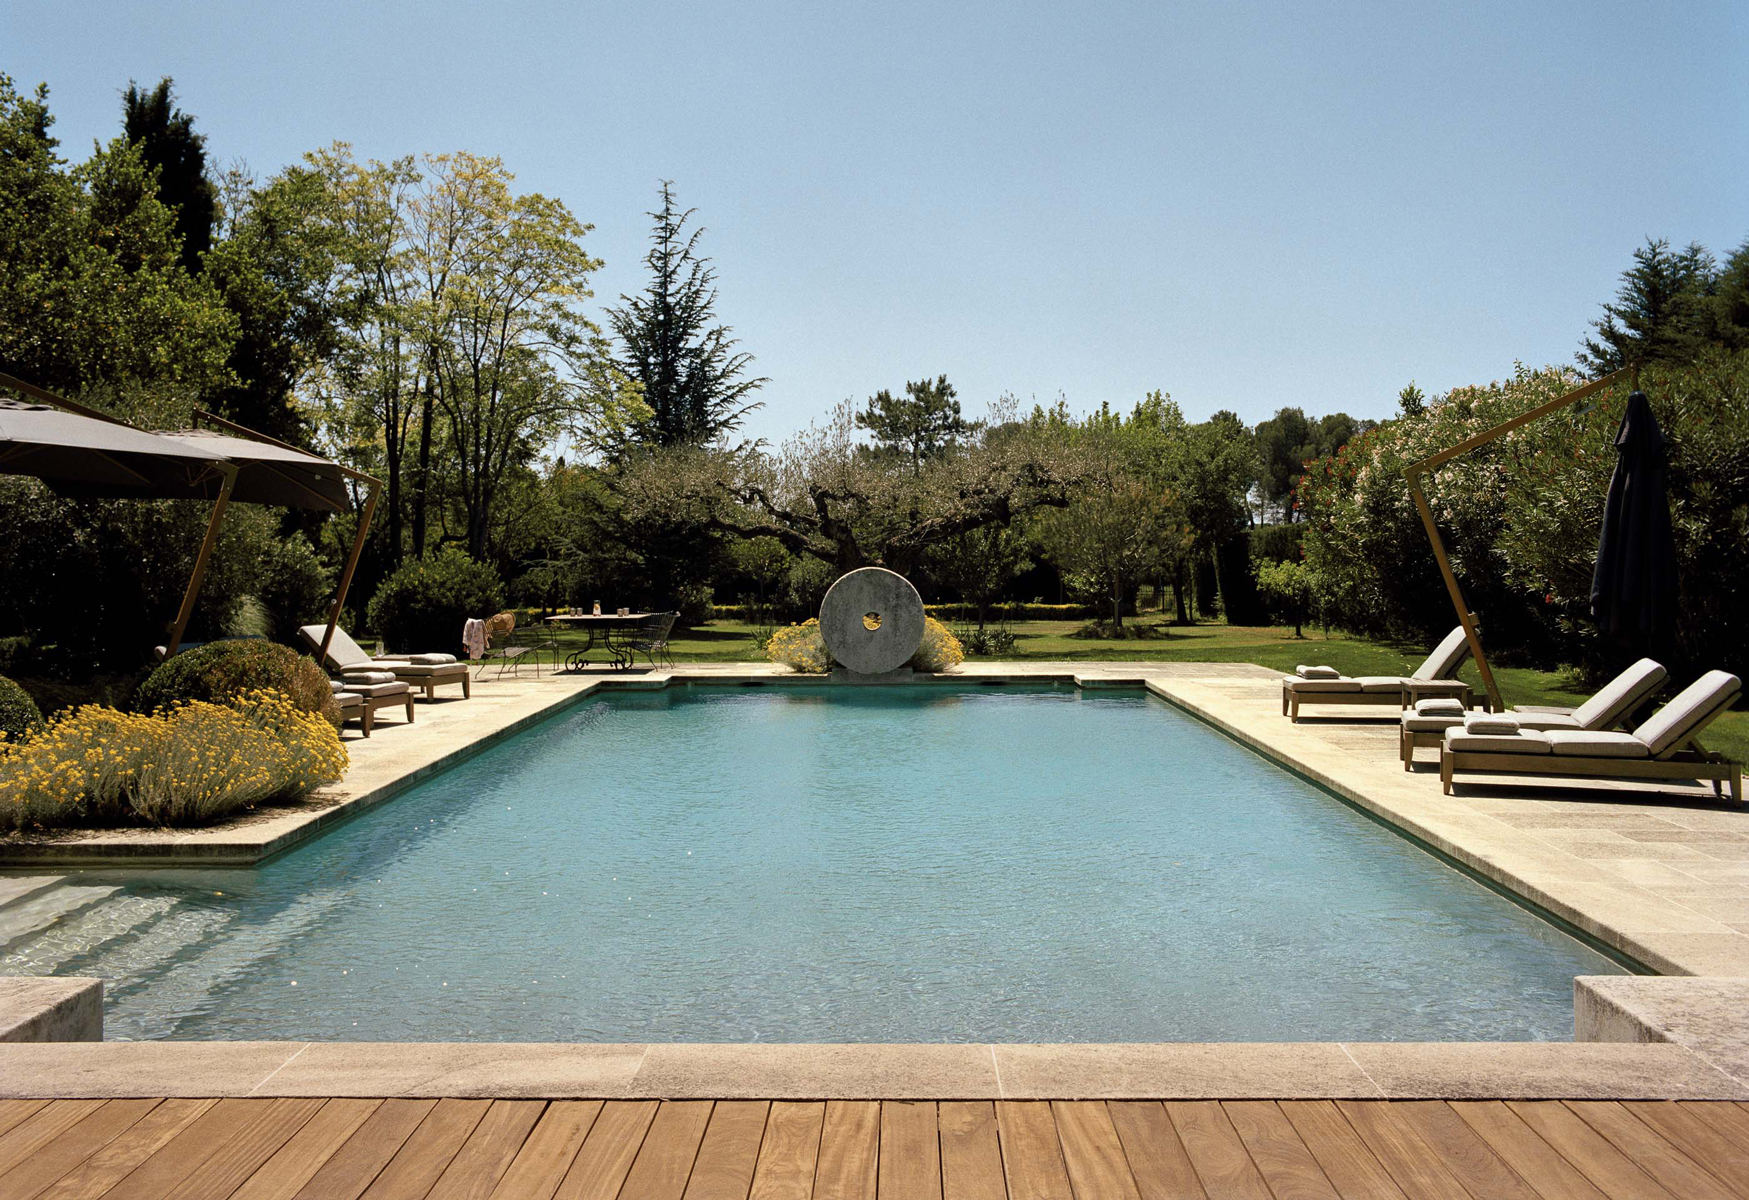 Le Mas de Chabran puts a fresh spin on country living in Provence